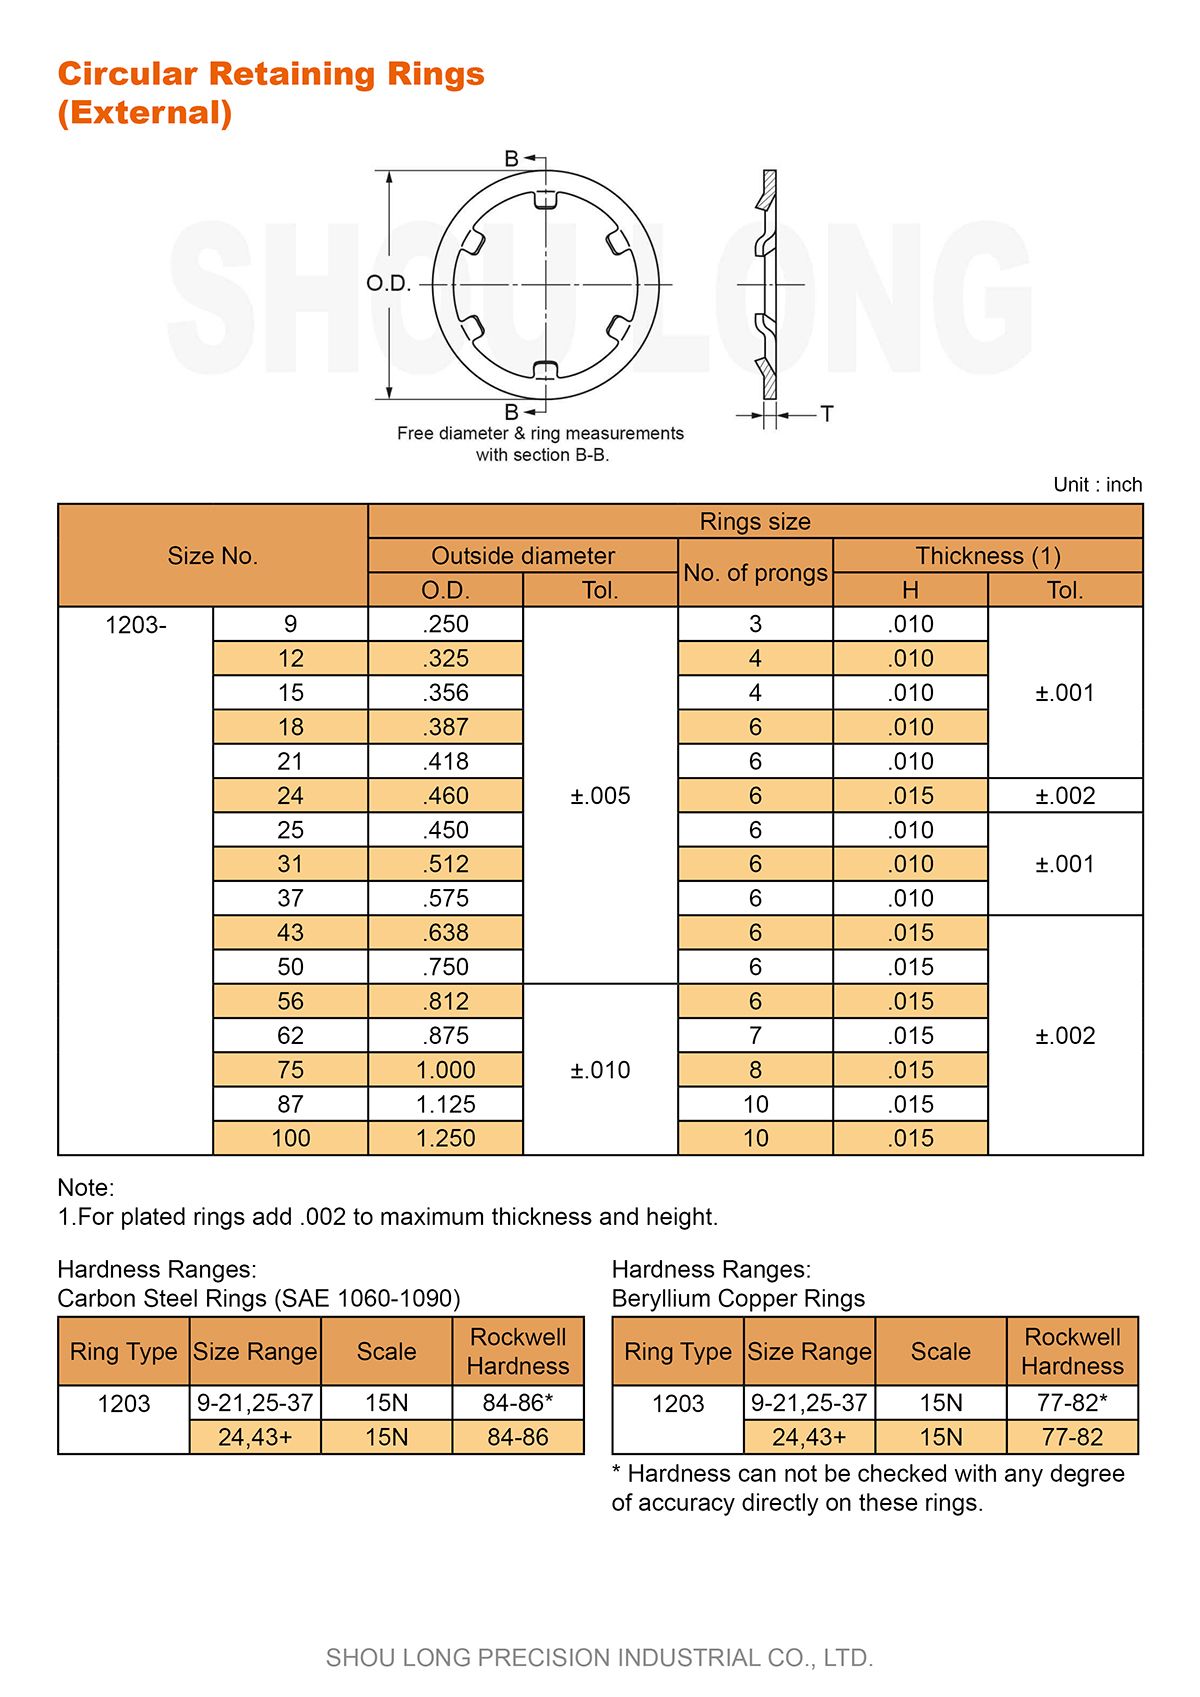 Spec of Inch Circular Retaining Rings for Shaft